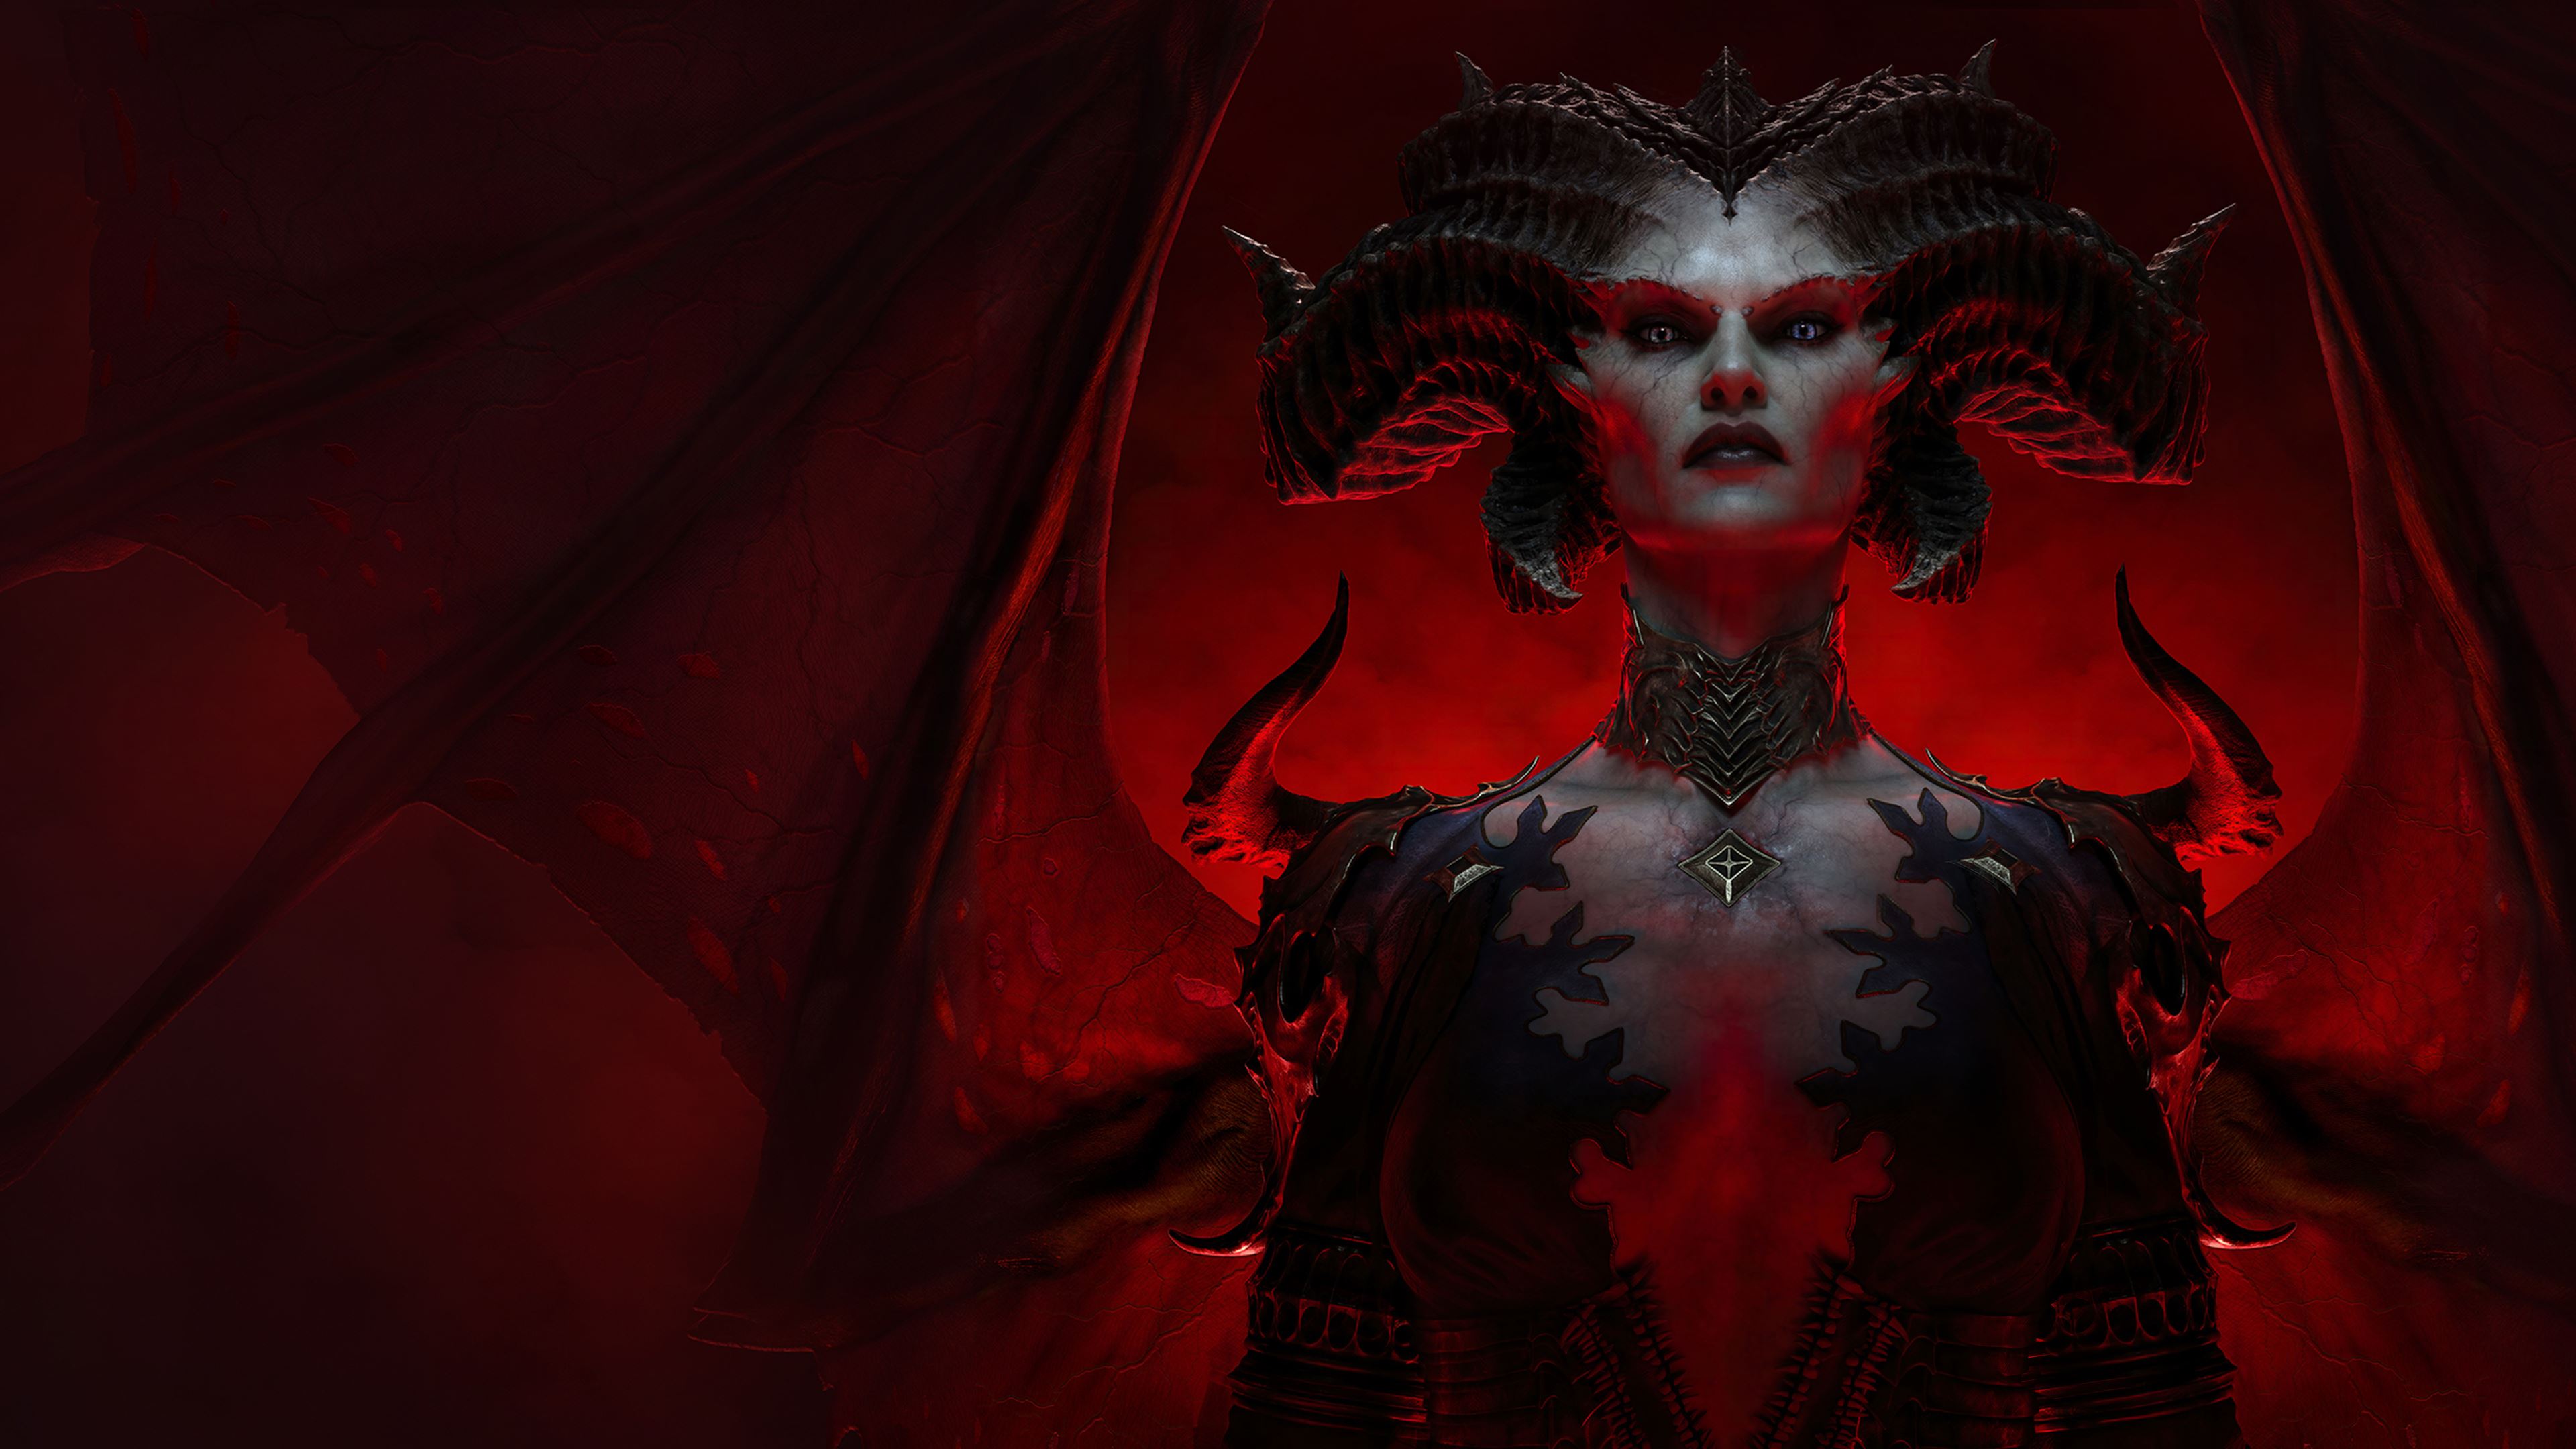 Lilith stares angrily while standing in front of a blood red backdrop in key art for Diablo 4.